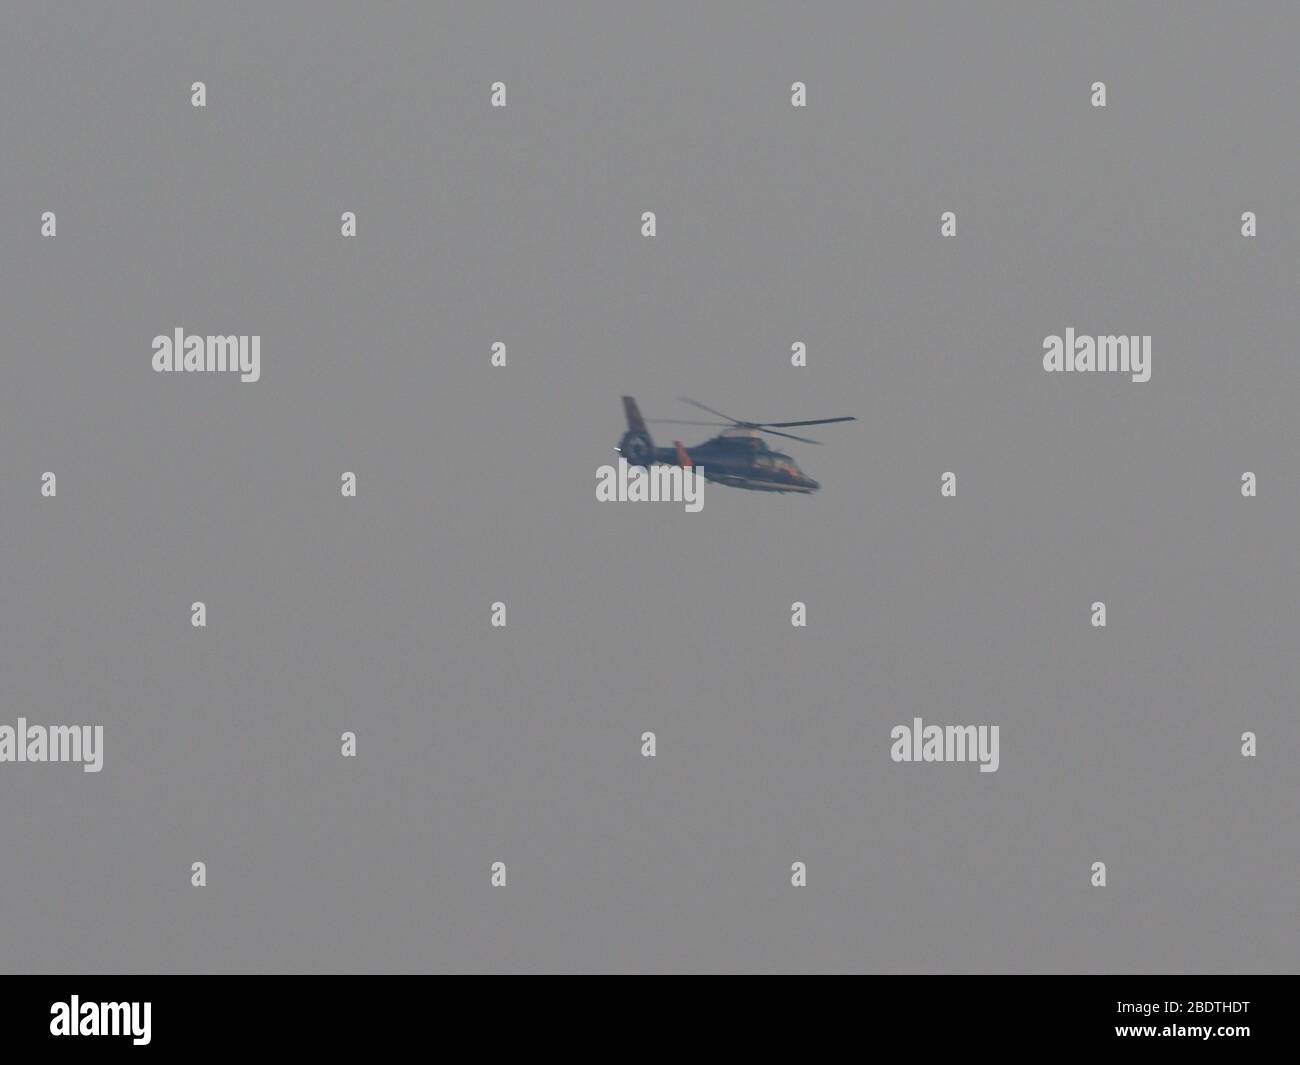 Sheerness, Kent, UK. 9th Apr, 2020. Two Special Air Services (SAS) AS65N3 Dauphin helicopters seen passing overhead Sheerness, Kent this evening. The helicopters are from 658 Squadron Air Army Corps / 22nd Special Air Service and are rarely seen.  Credit: James Bell/Alamy Live News Stock Photo